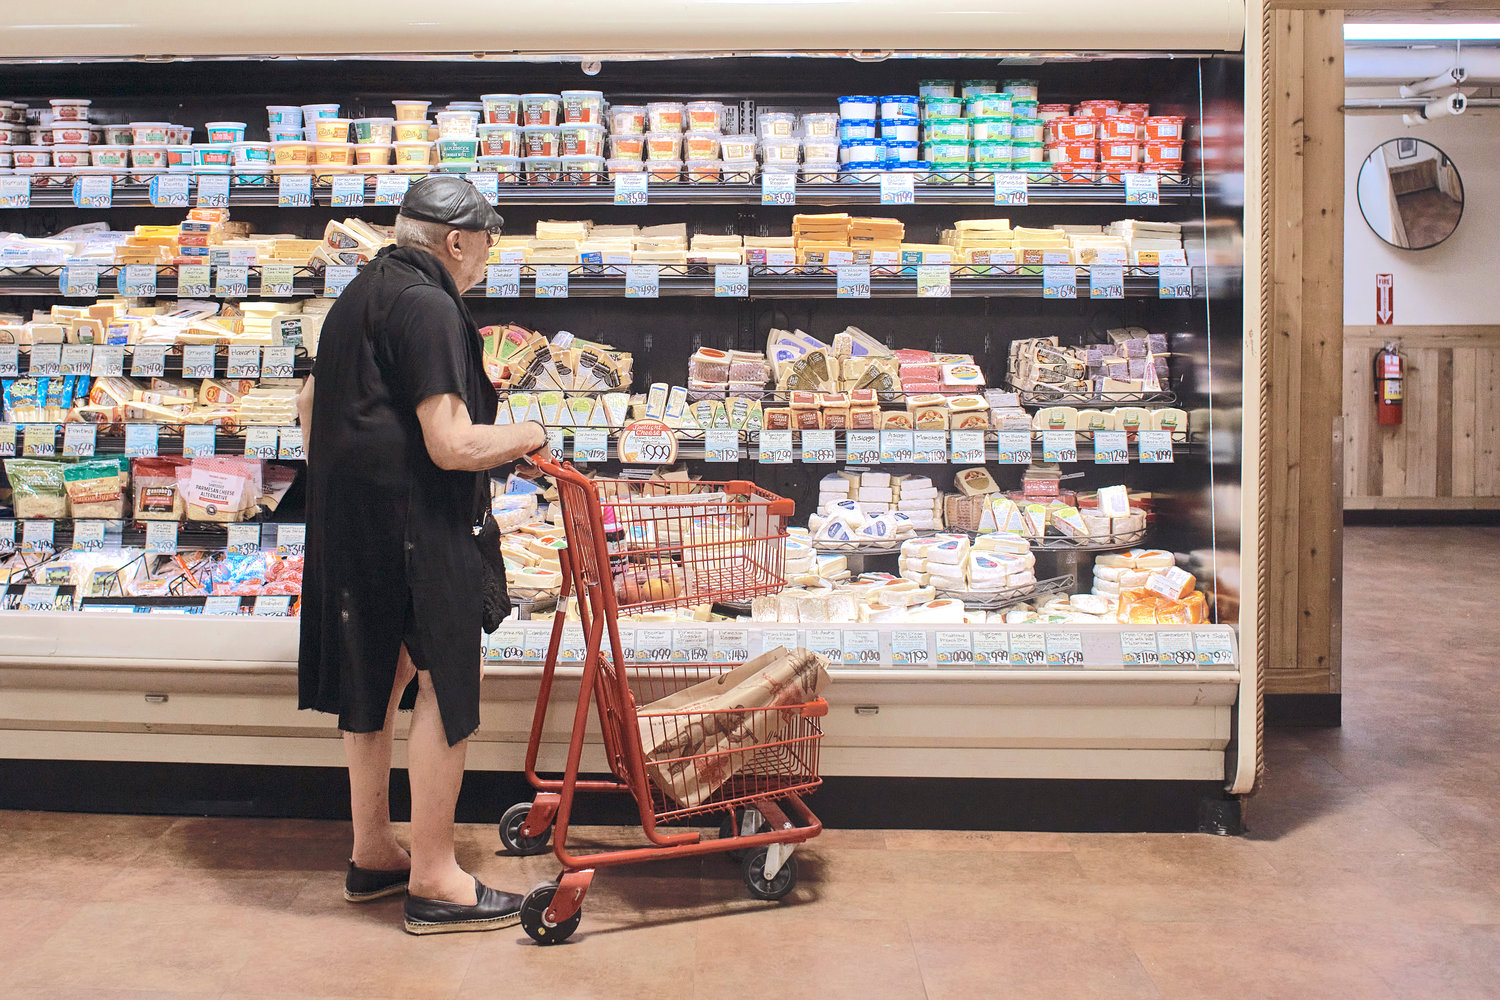 A man shops at a supermarket on July 27, in New York. On Oct. 13, the U.S. government is set to announce what’s virtually certain to be the largest increase in Social Security benefits in 40 years. The boost is meant to allow beneficiaries to keep up with inflation, and plenty of controversy surrounds the move.